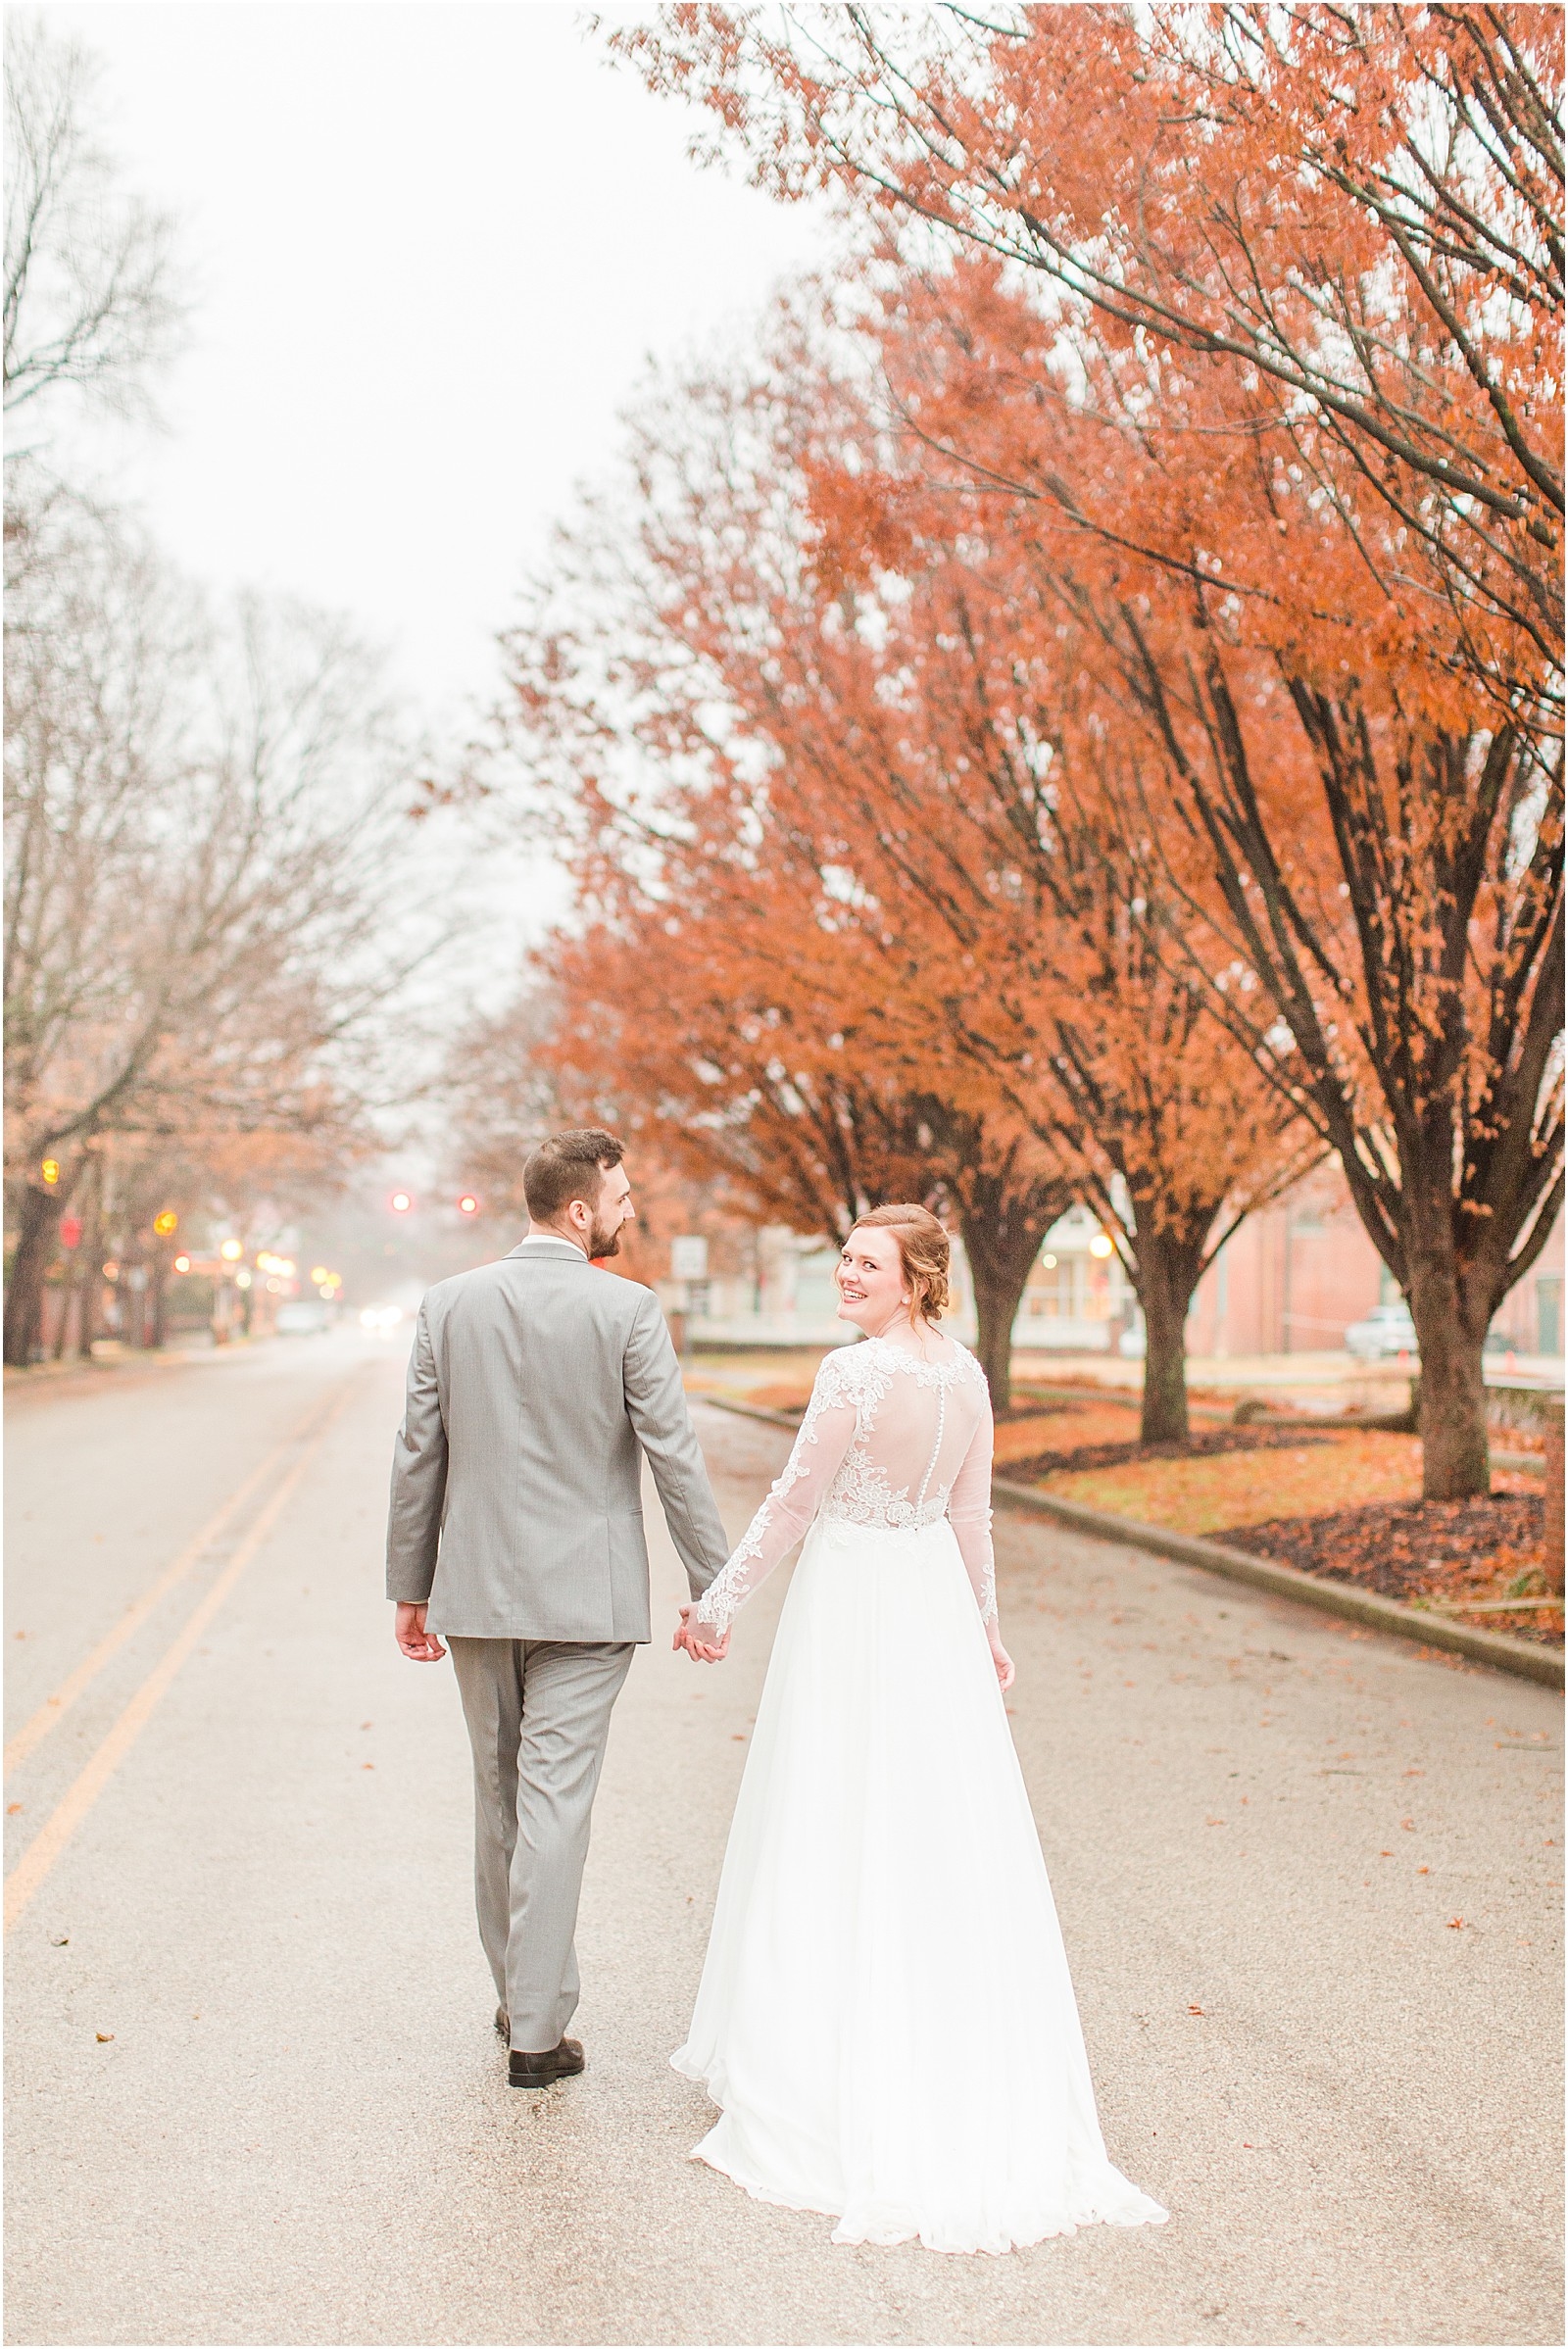 Amy and Logan | A Rainy New Harmony Indiana wedding | Bret and BRandie Photography | Bret and Brandie Photography | 0068.jpg